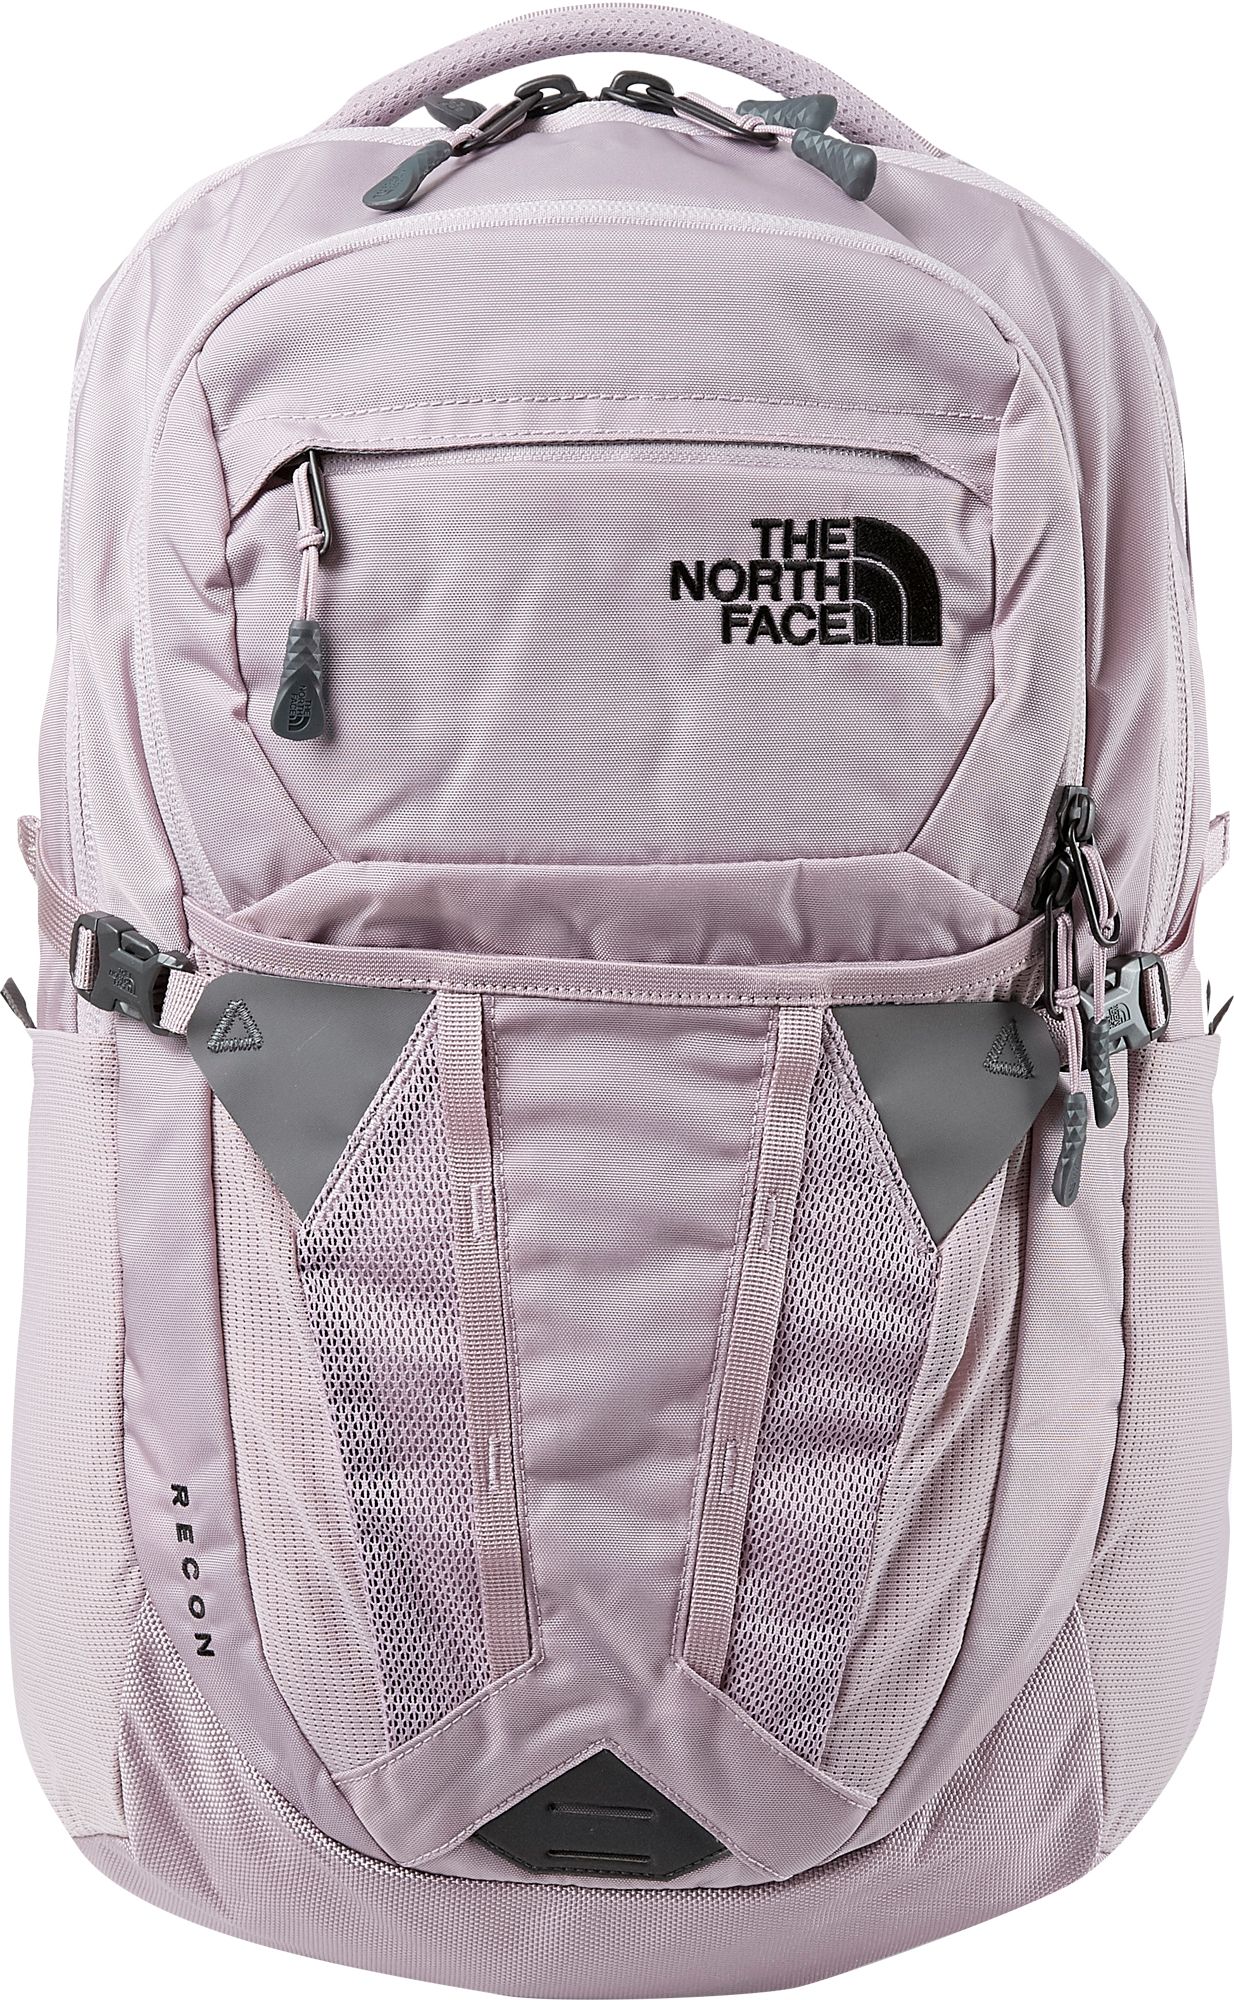 north face backpack cost